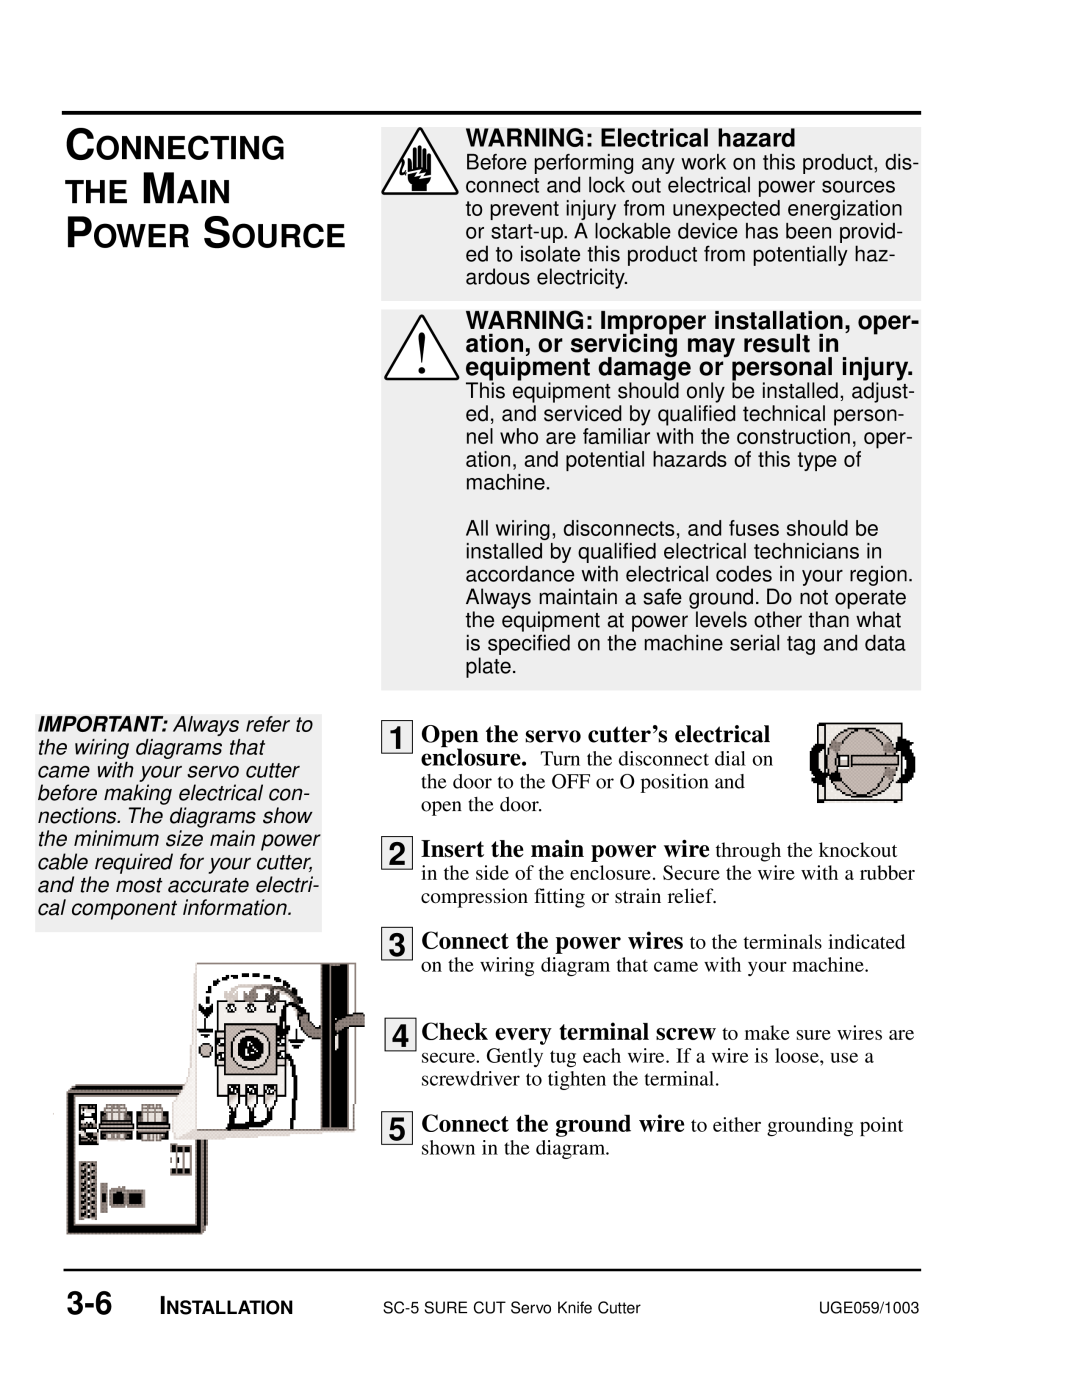 Conair SC-5 manual Connecting The Main Power Source, WARNING Electrical hazard 